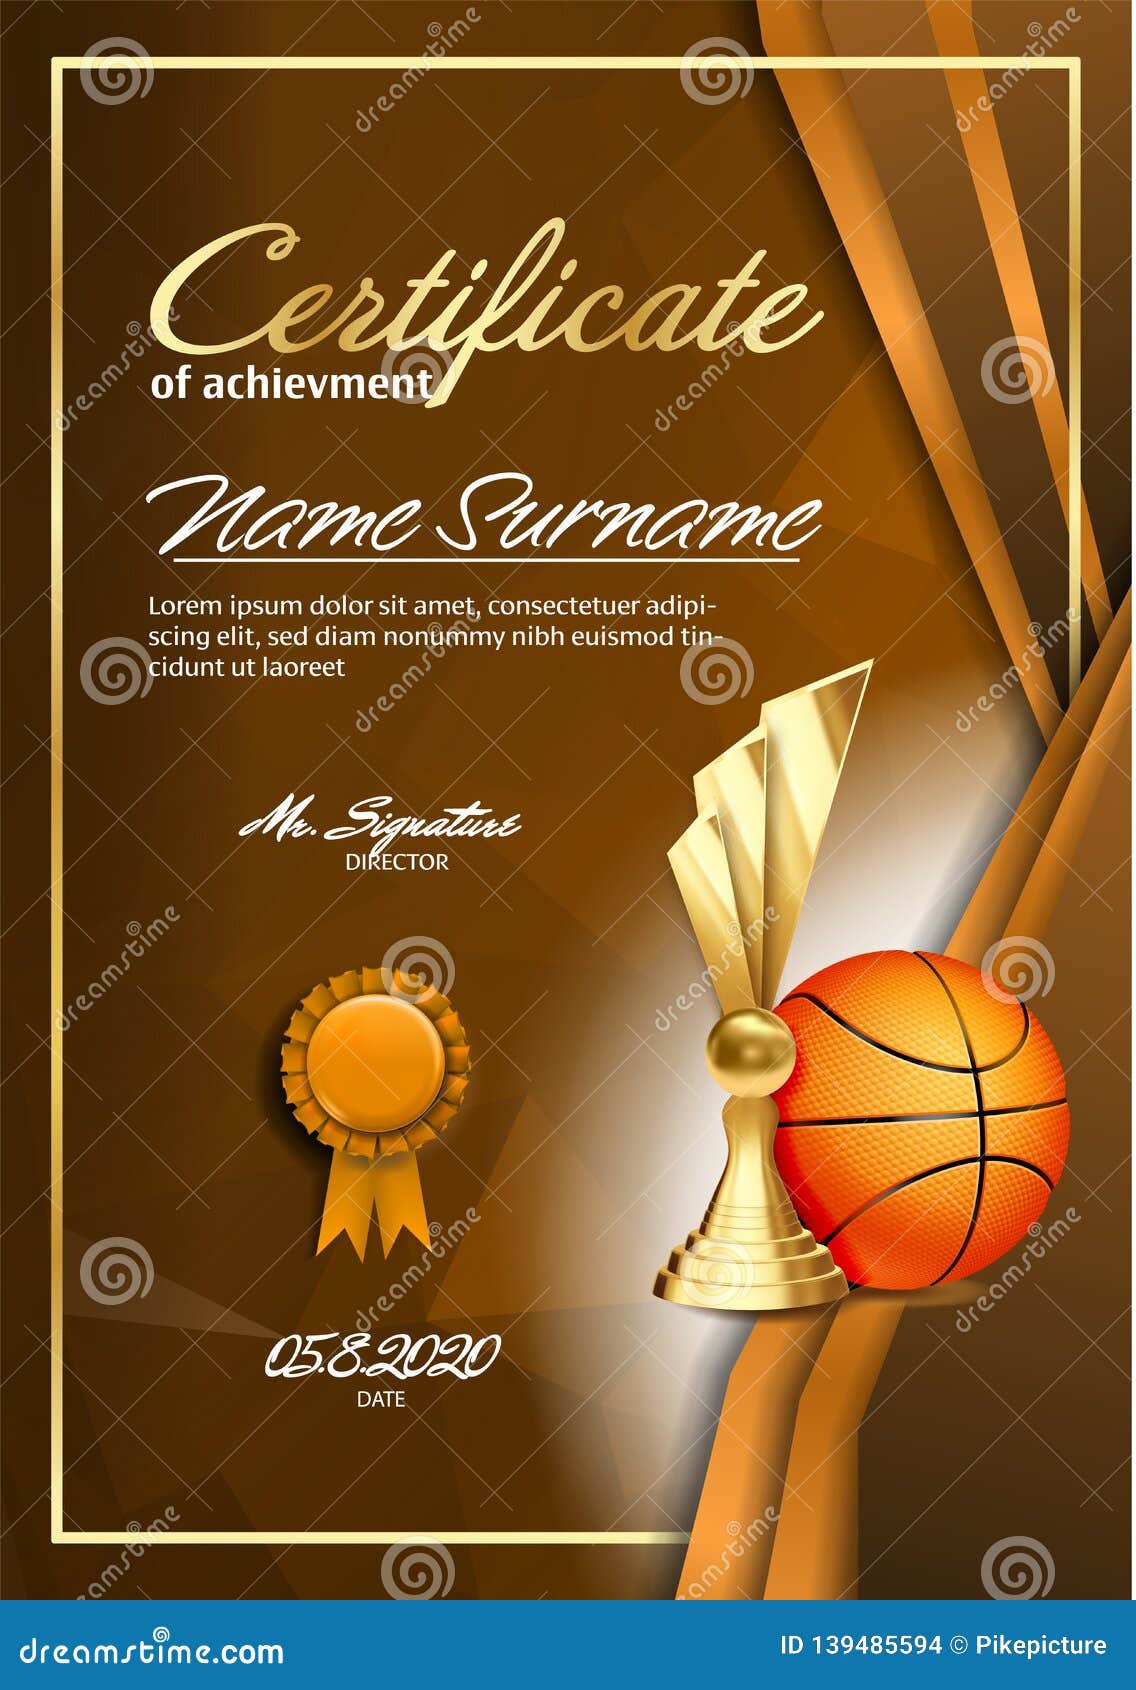 Basketball Certificate Stock Illustrations – 21 Basketball Pertaining To Basketball Camp Certificate Template